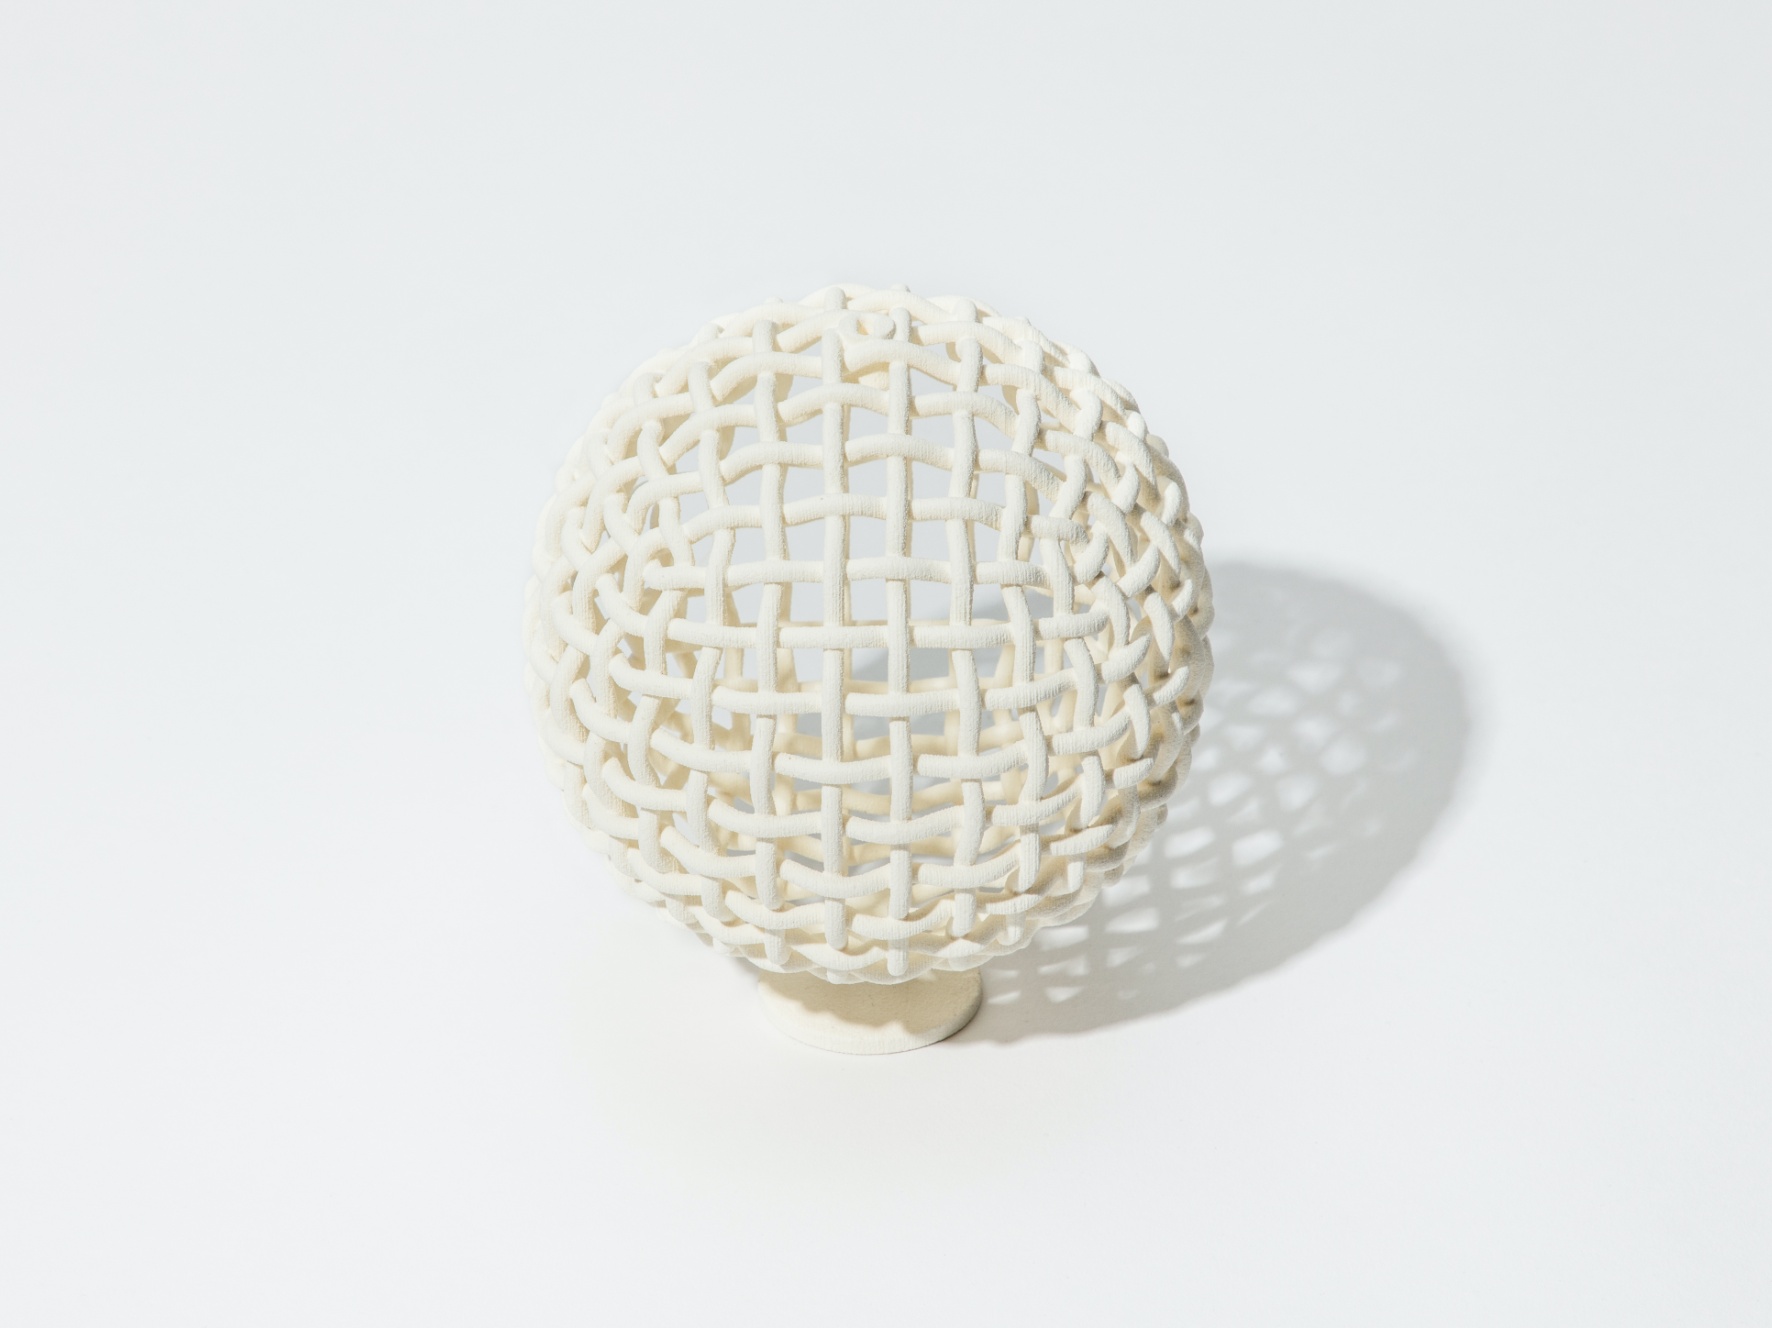 Image of Sphere test piece